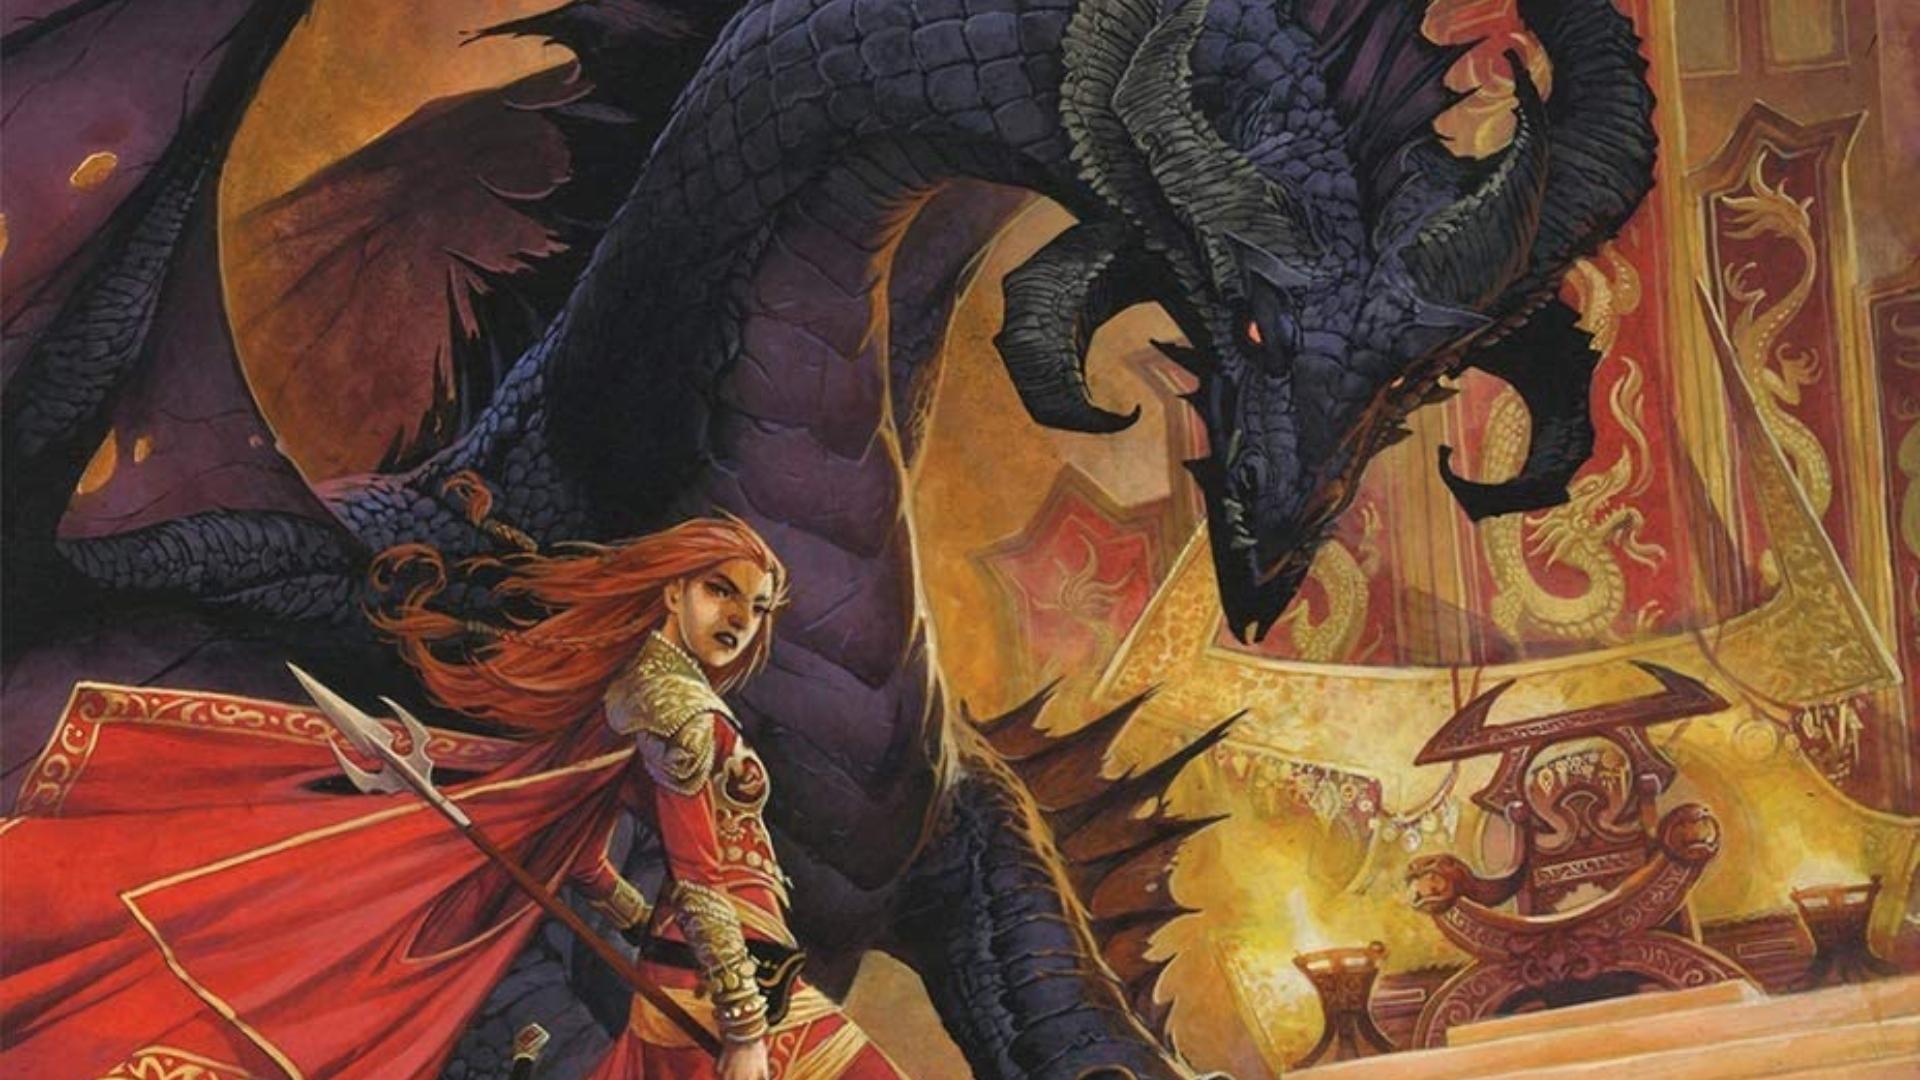 Get everything you need to play Pathfinder for $5 in this Humble